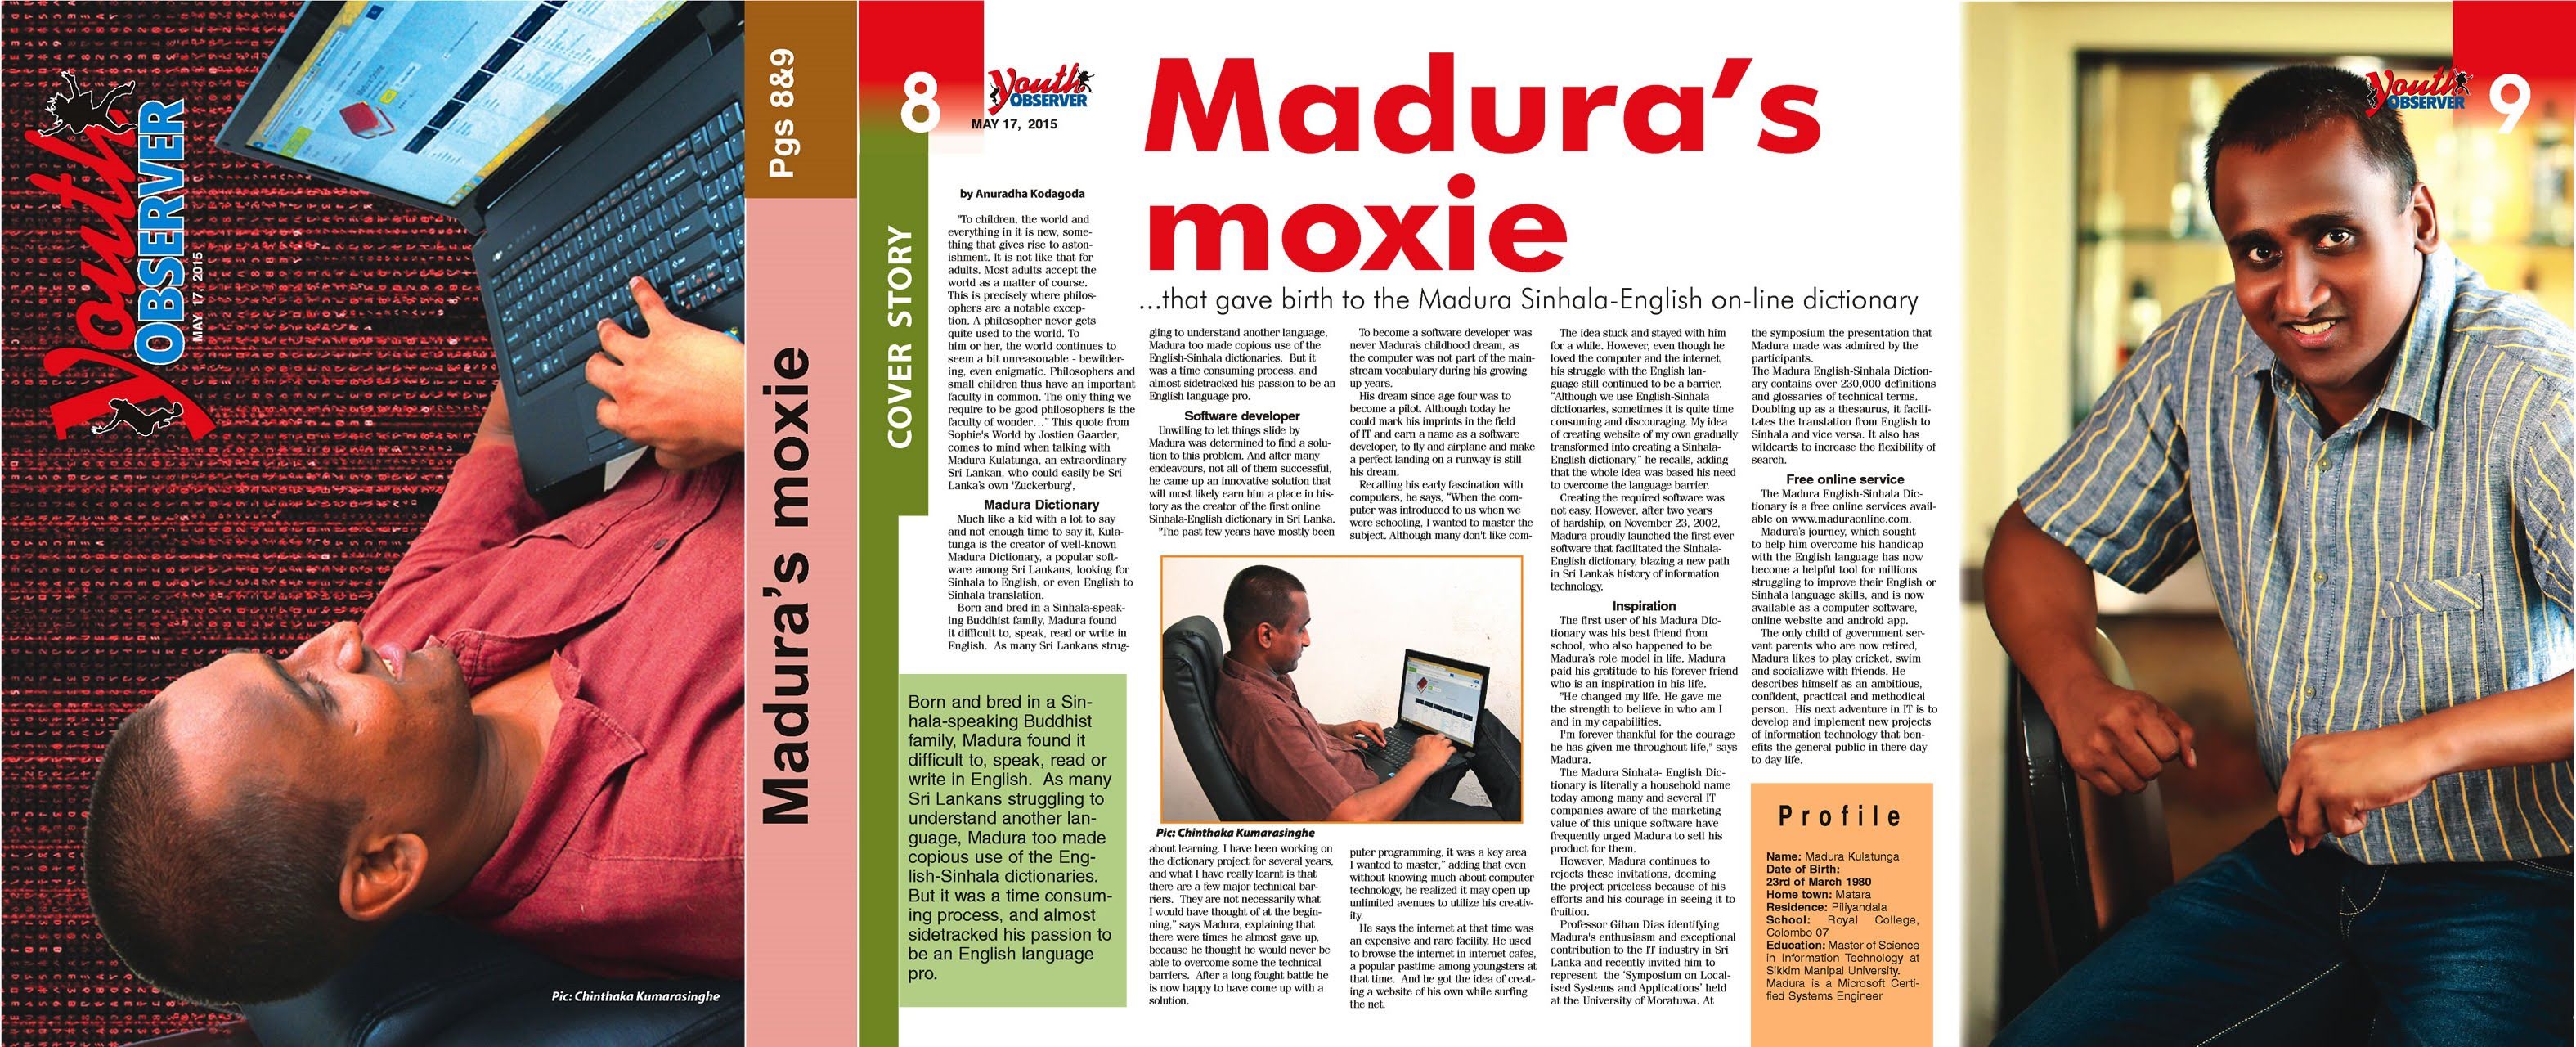 Madura's moxie - Sunday Observer Youth Observer 17-May-2015 Cover Page & Page 8-9